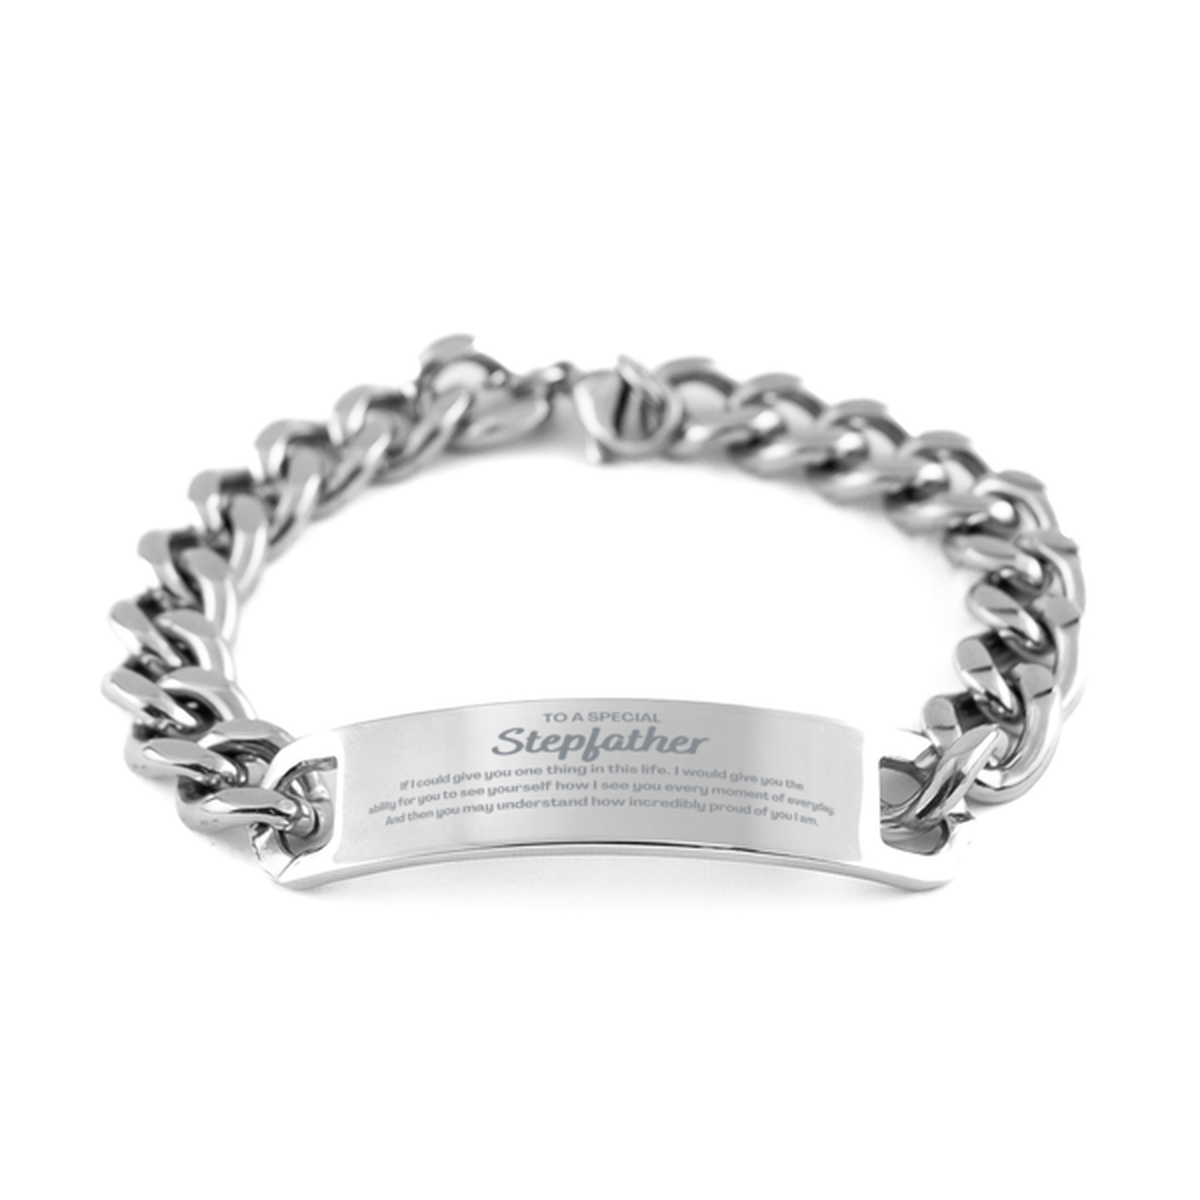 To My Stepfather Cuban Chain Stainless Steel Bracelet, Gifts For Stepfather Engraved, Inspirational Gifts for Christmas Birthday, Epic Gifts for Stepfather To A Special Stepfather how incredibly proud of you I am